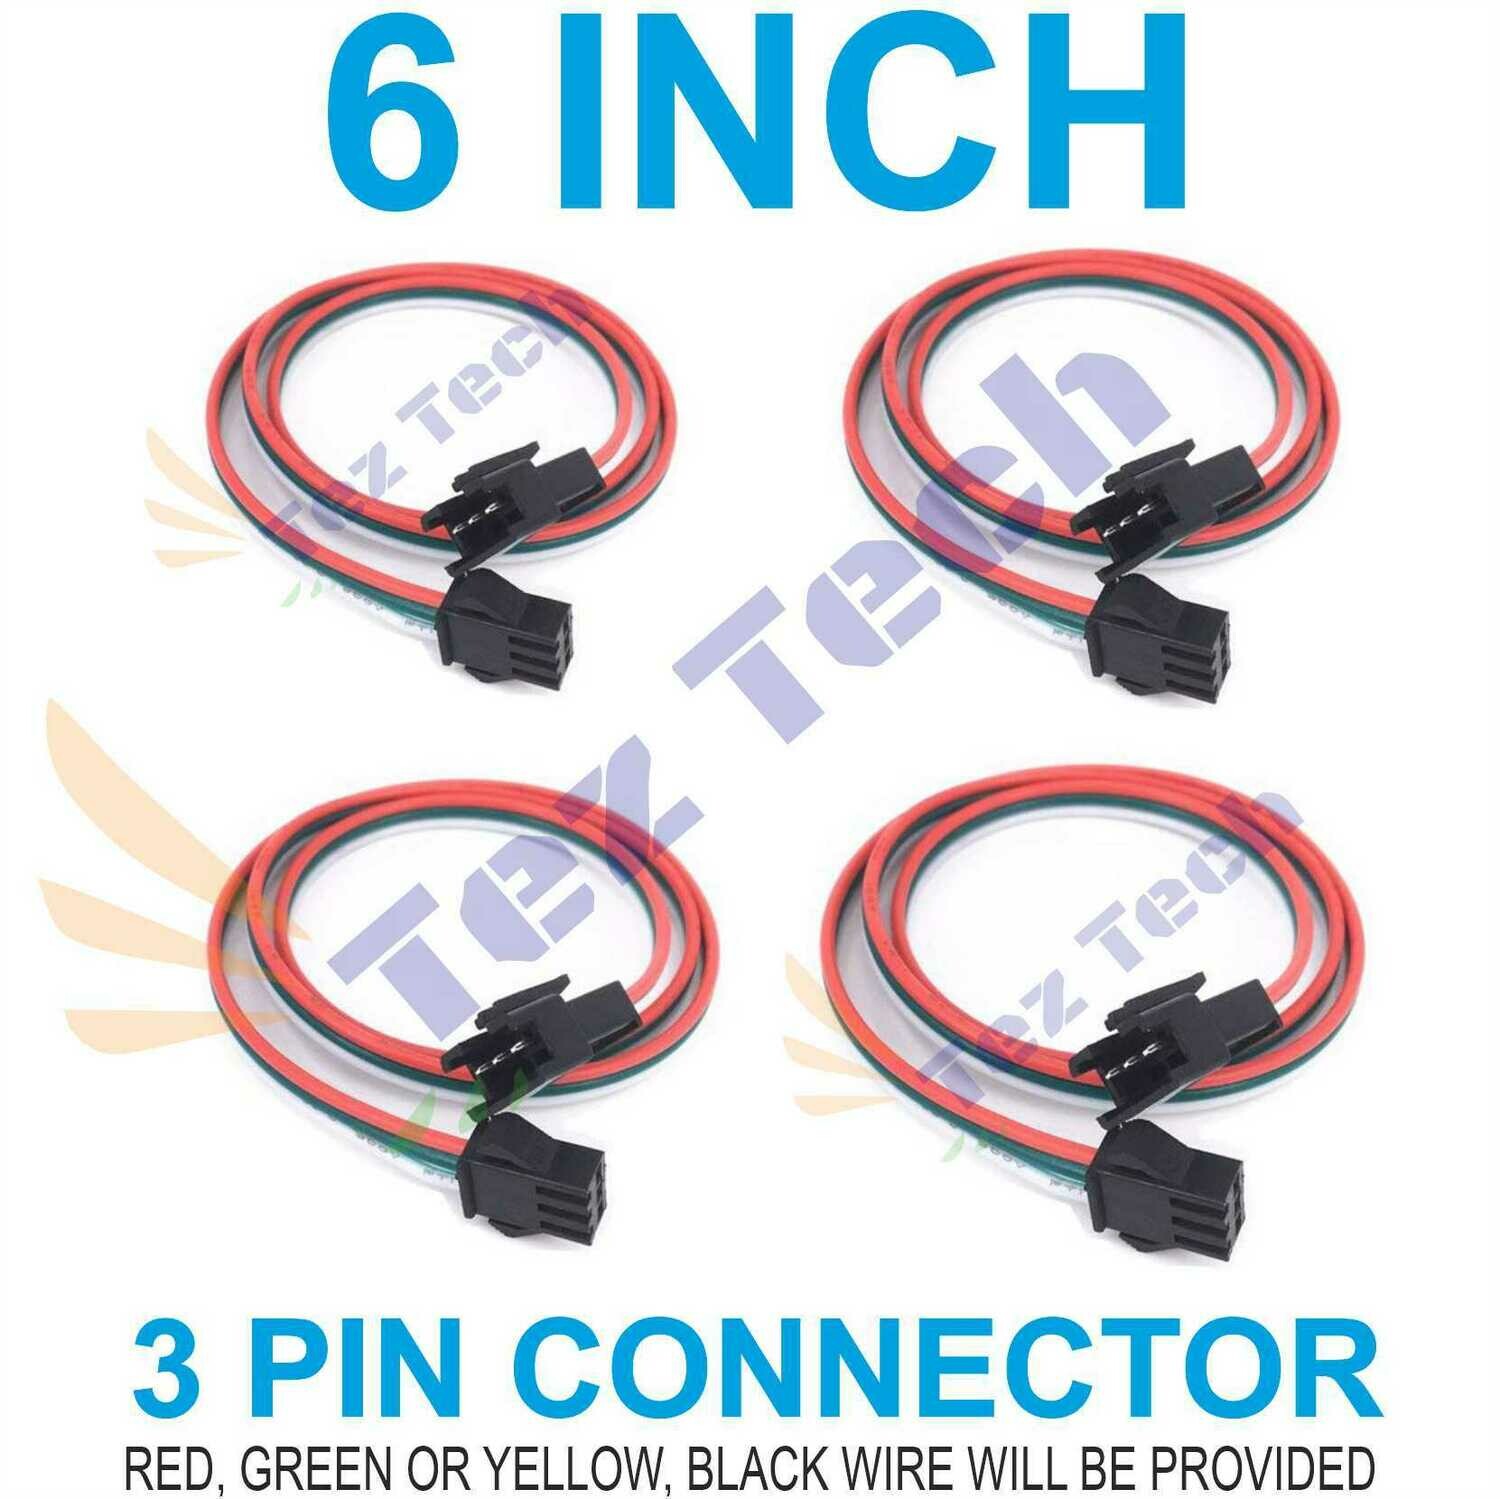 (RMCNN48) 6 INCH MALE-FEMALE 3 PIN CONNECTOR